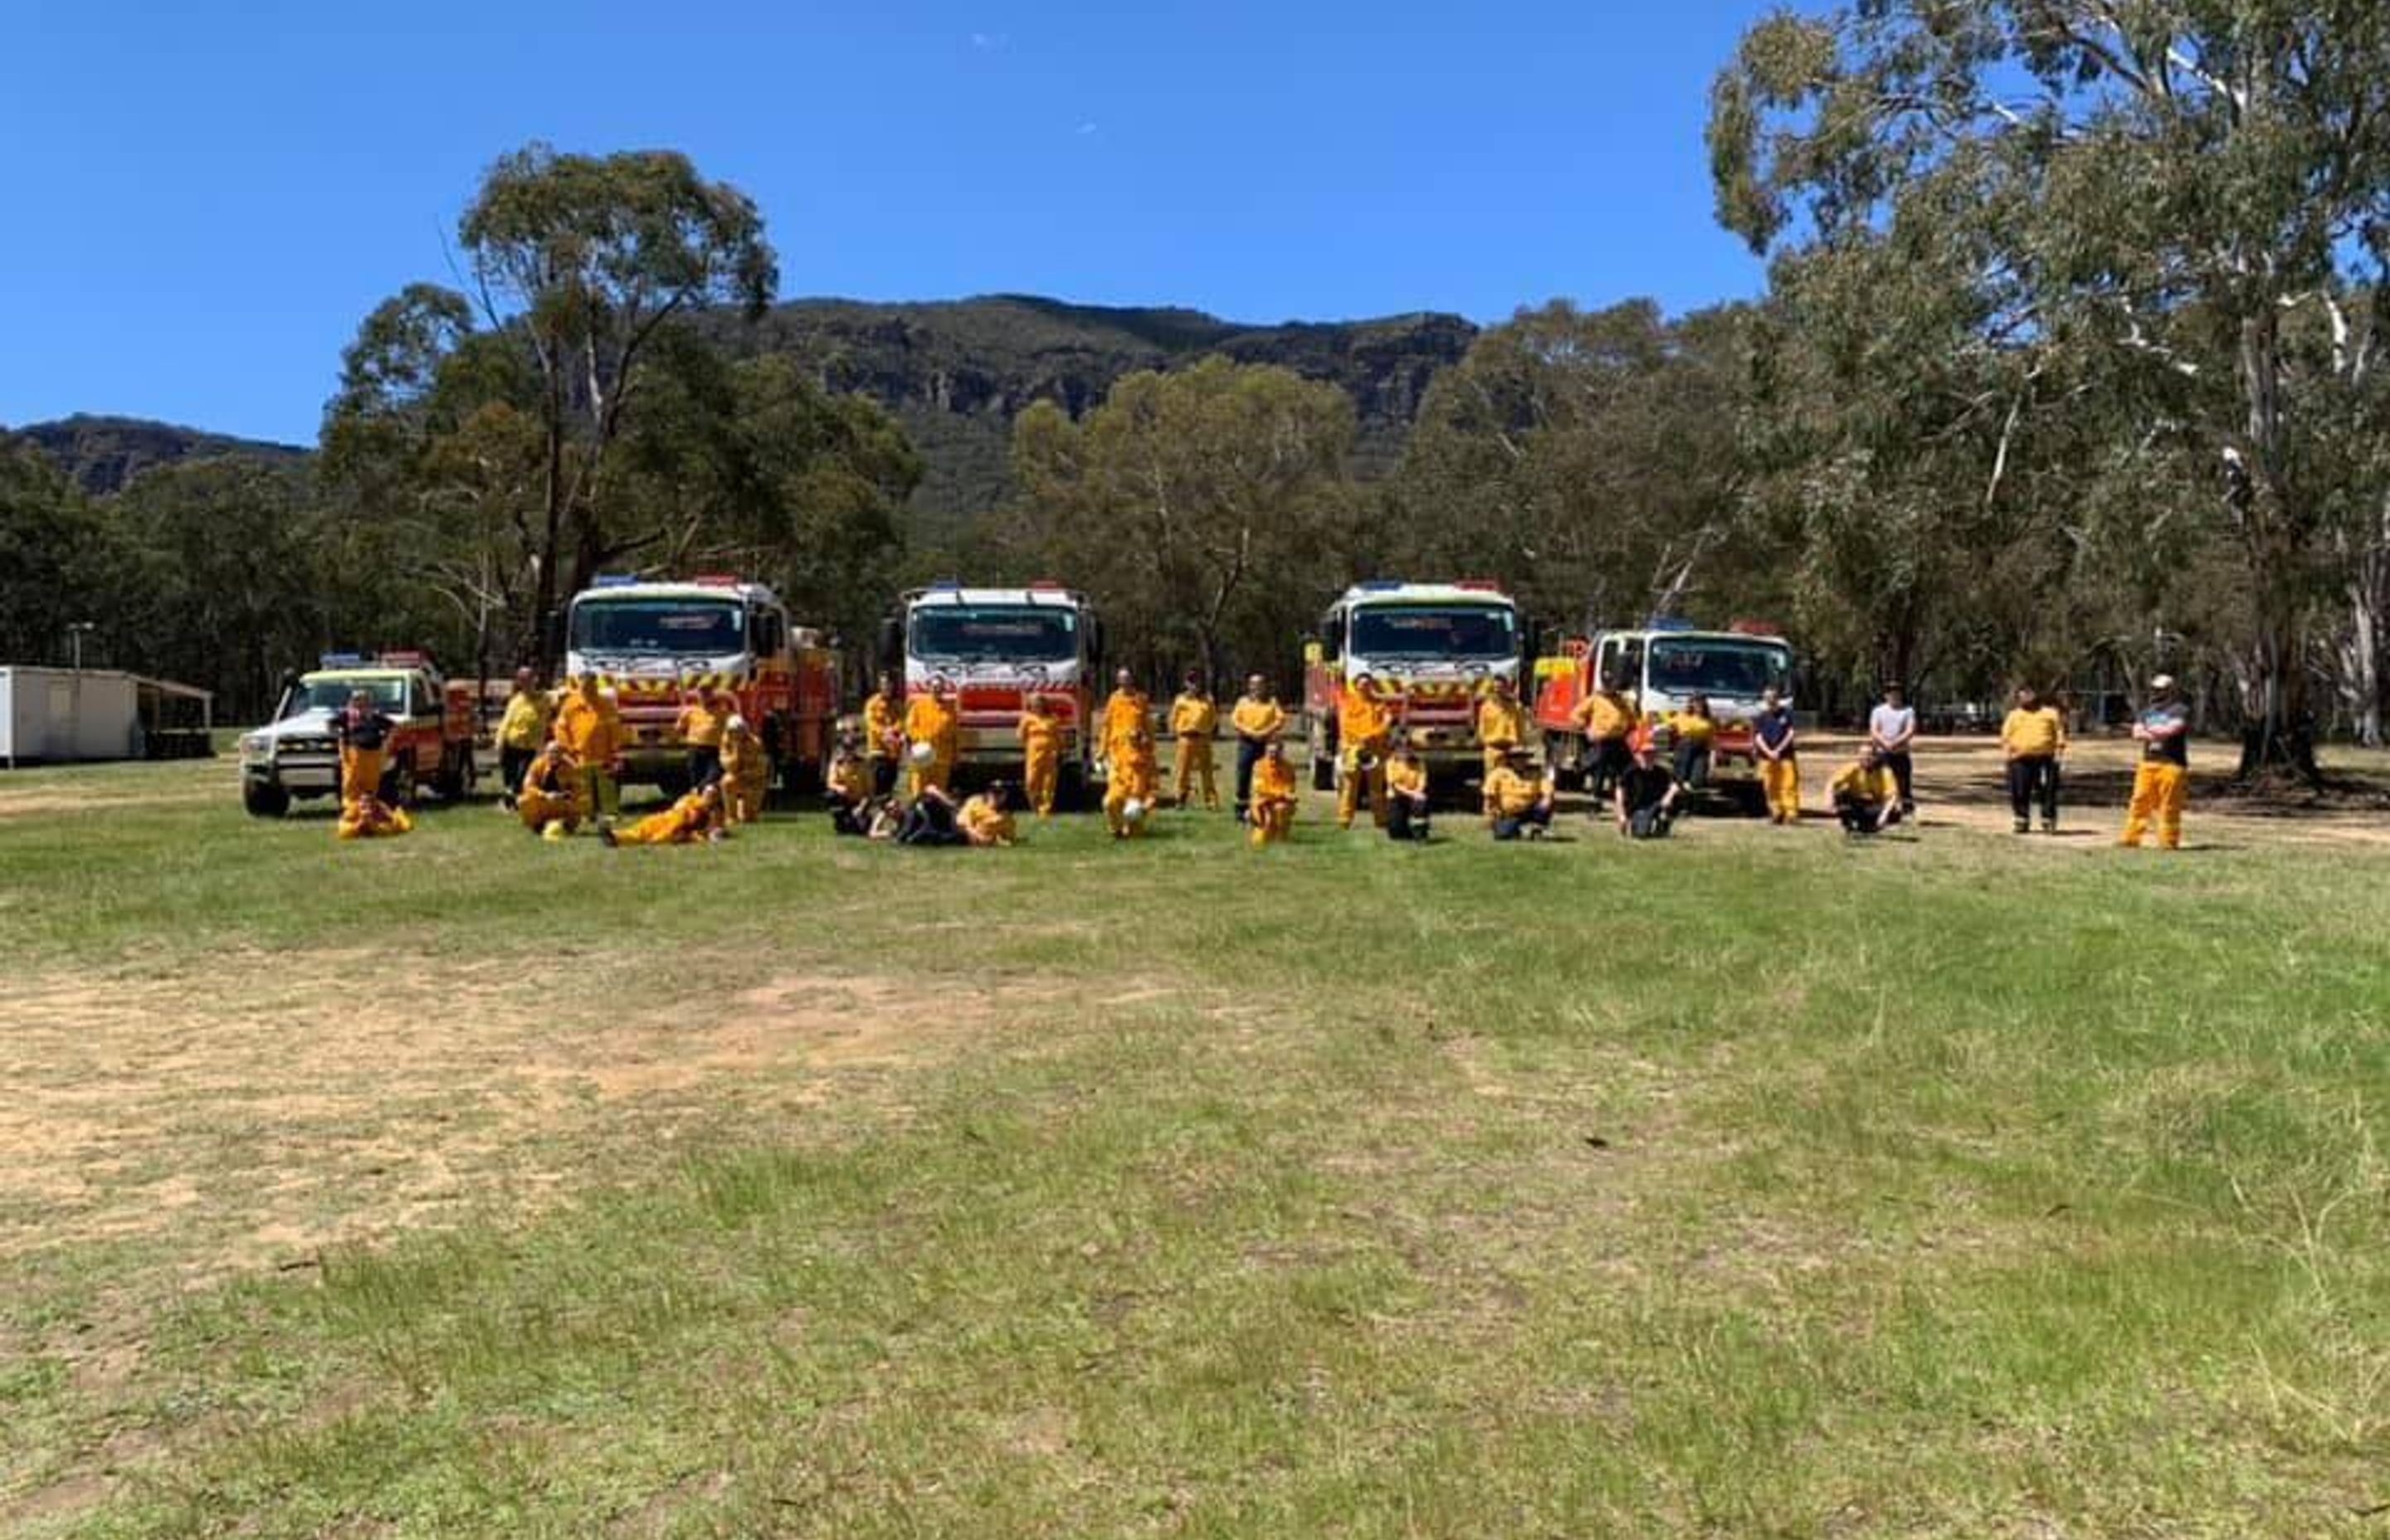 The RFS Blue Mountains West Sector 2020 Graduating crew at the Megalong Valley Show Ground. Source: Facebook